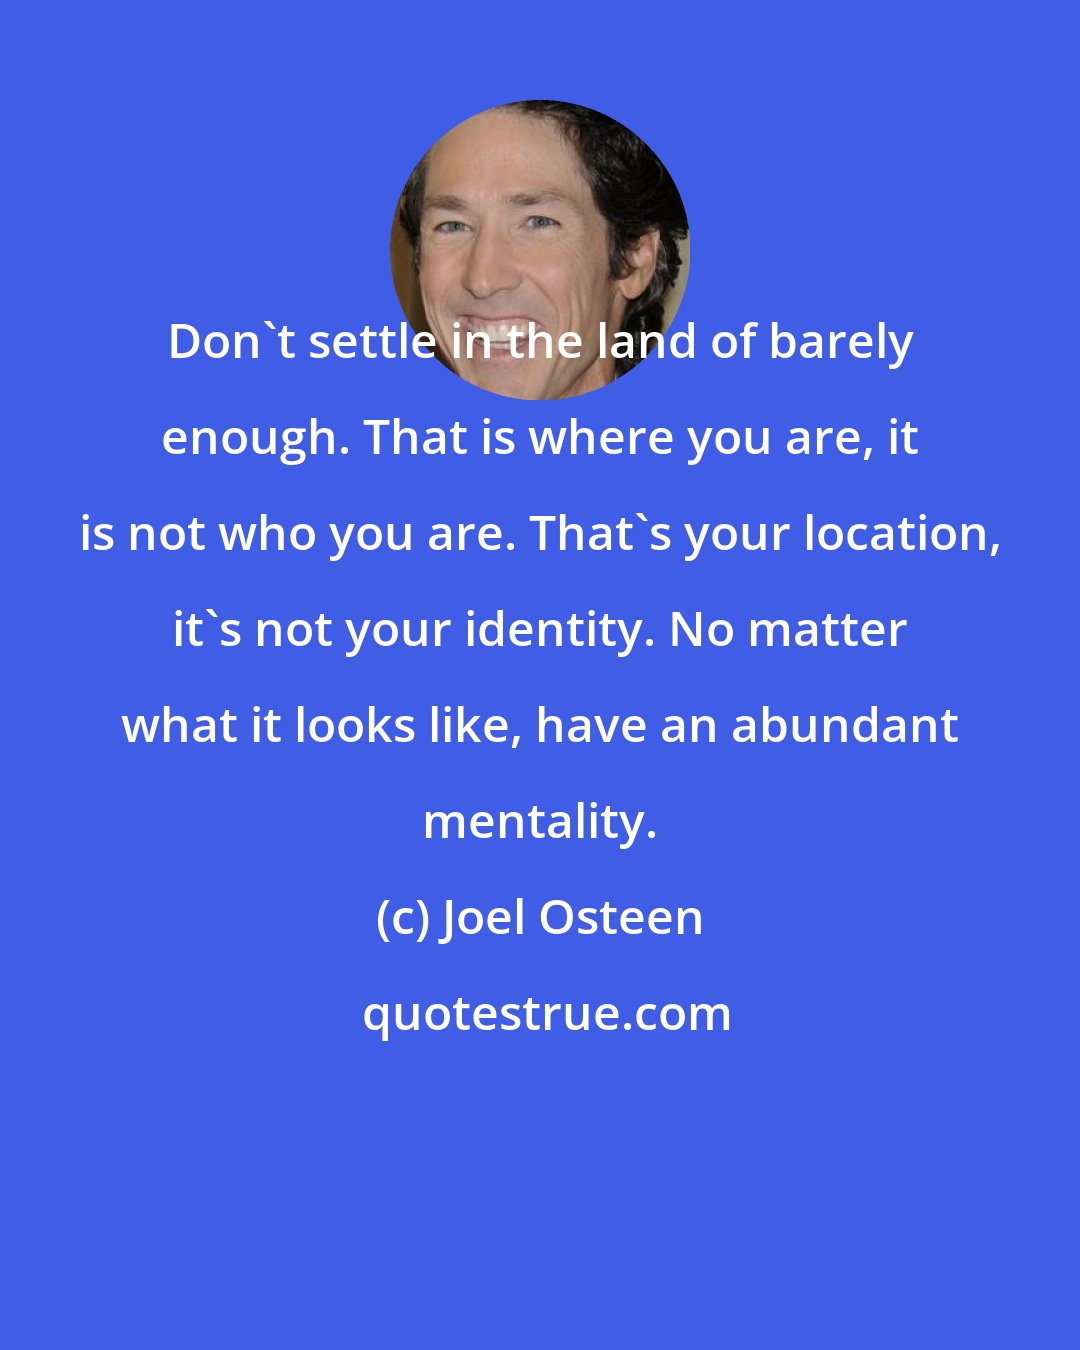 Joel Osteen: Don't settle in the land of barely enough. That is where you are, it is not who you are. That's your location, it's not your identity. No matter what it looks like, have an abundant mentality.